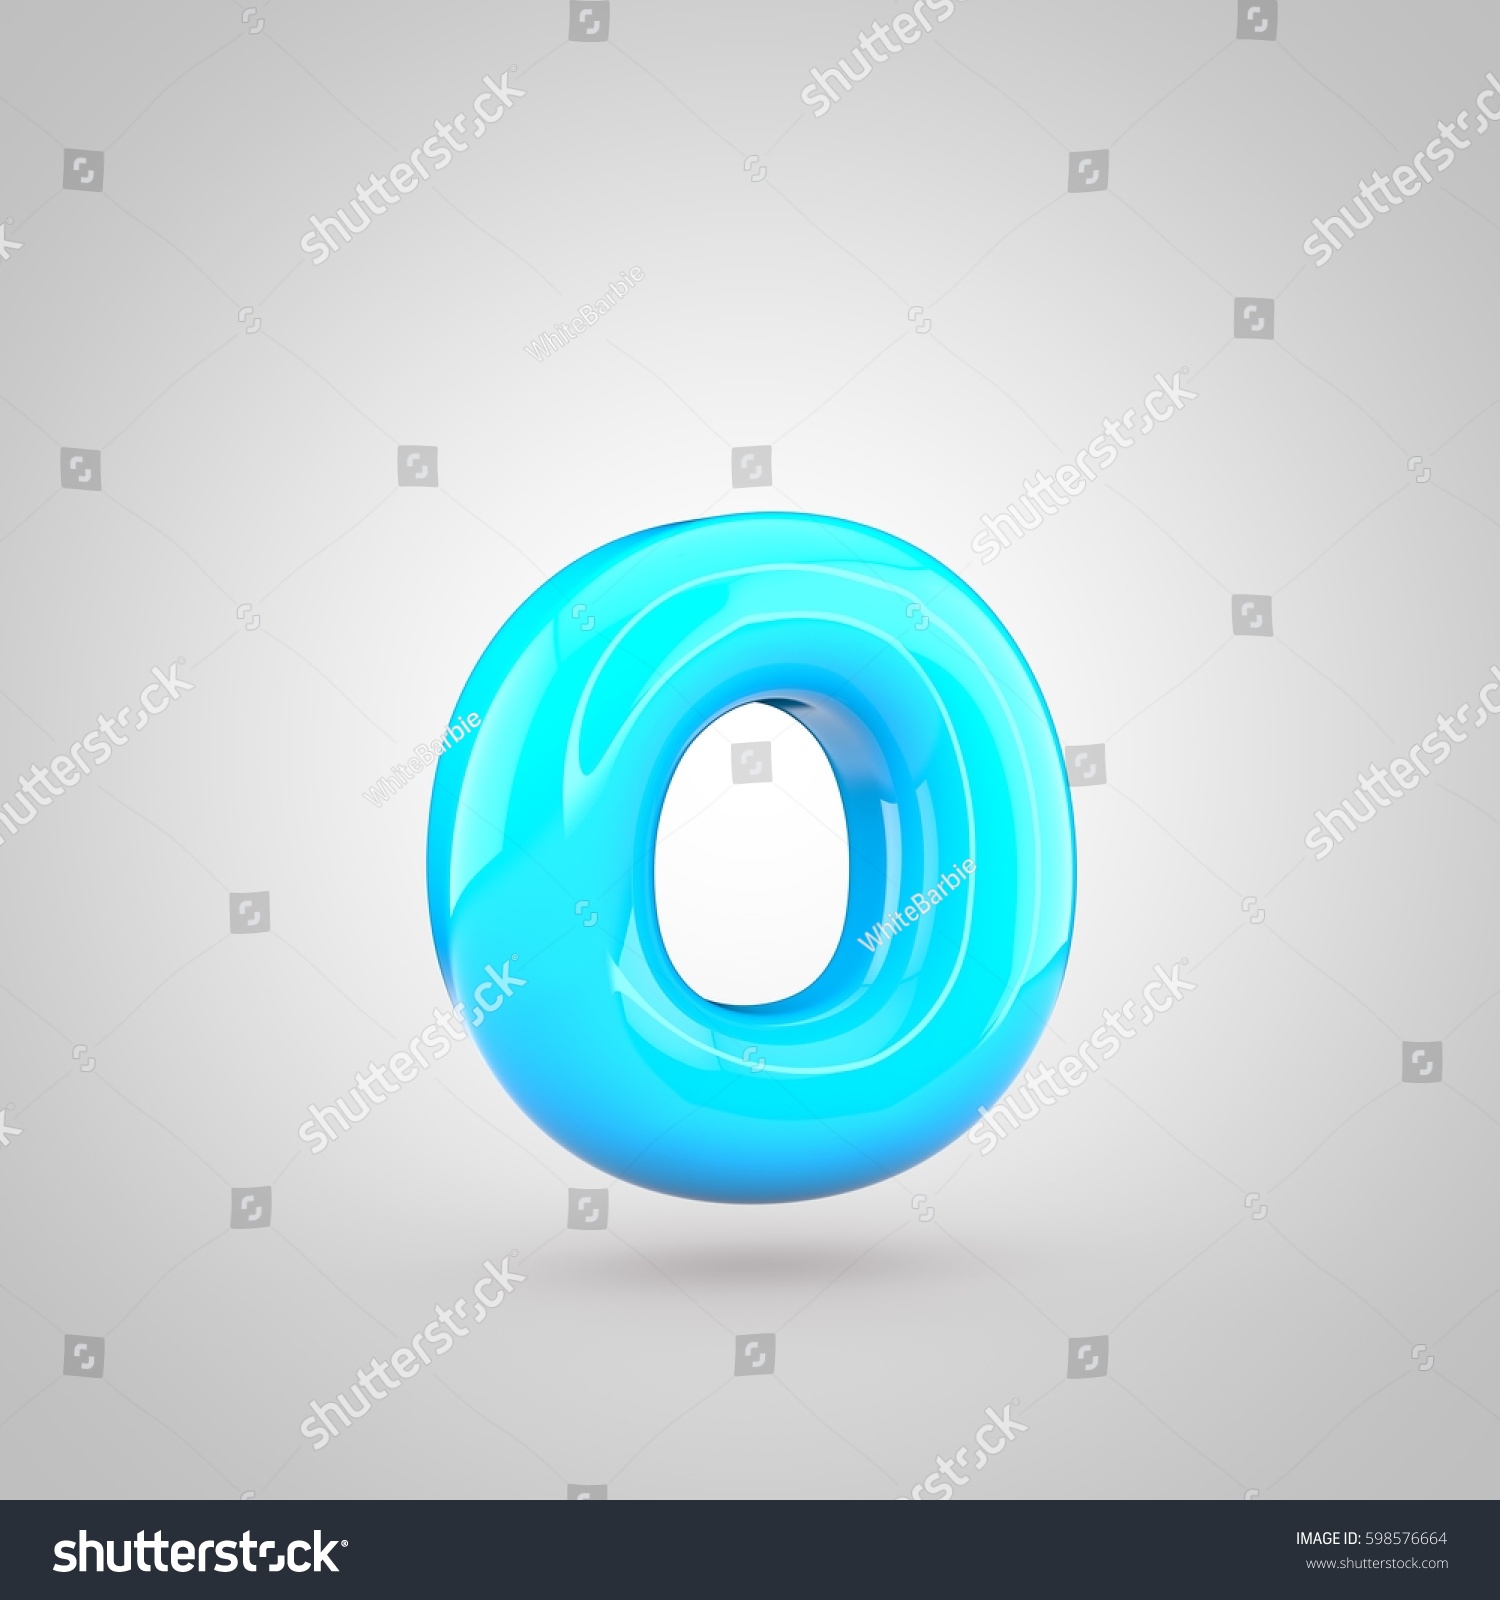 Glossy Blue Paint Letter O Lowercase 3d Render Of Bubble Twisted